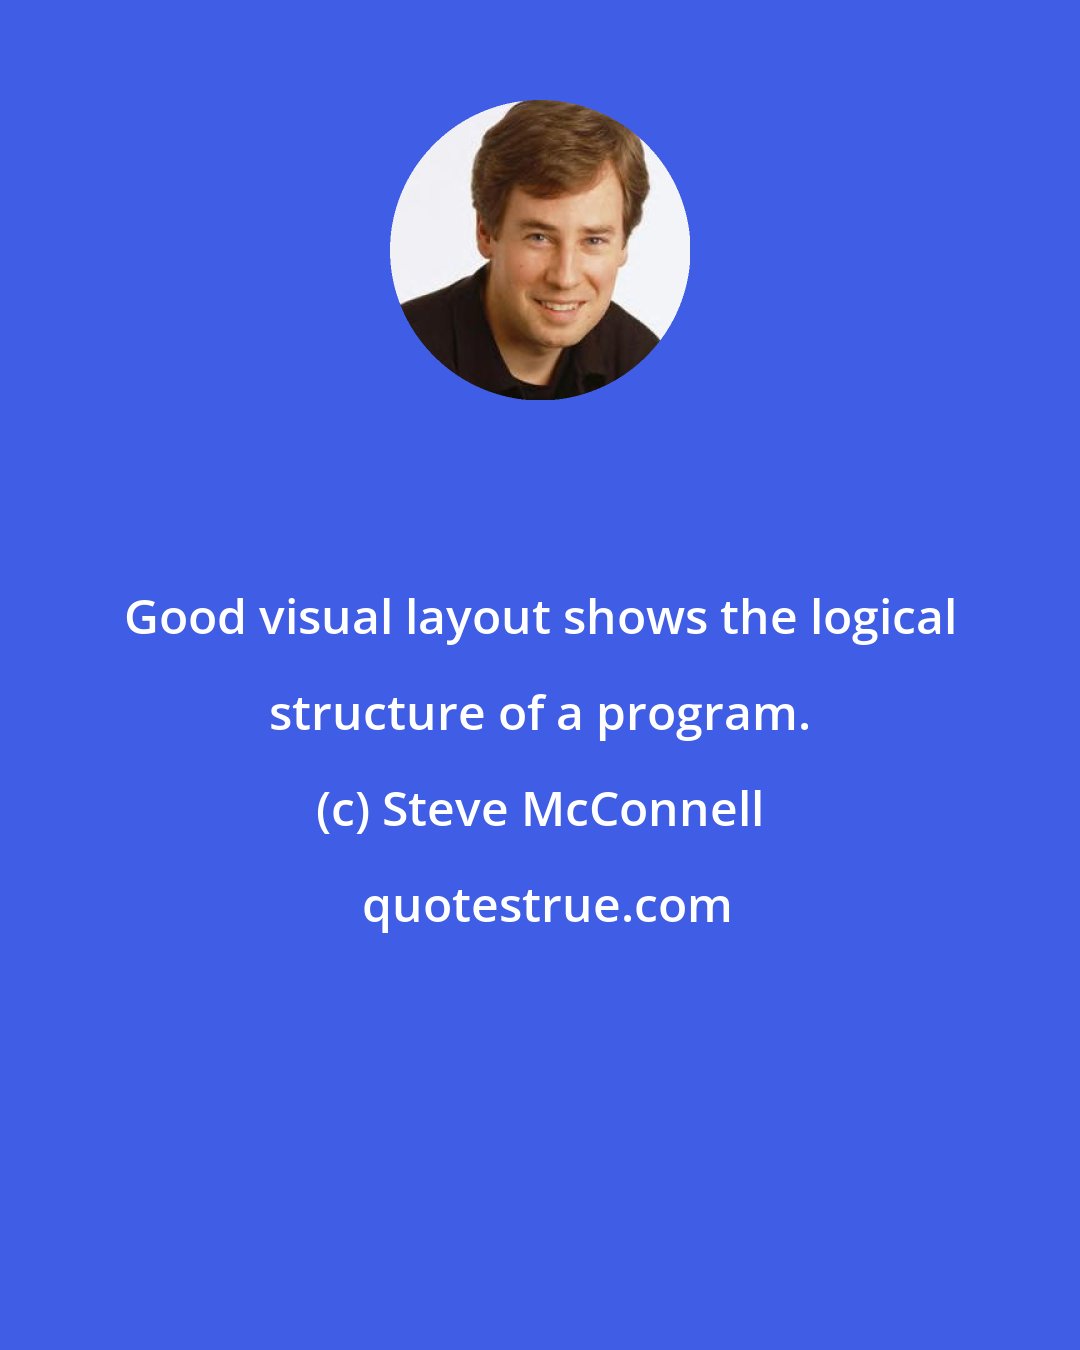 Steve McConnell: Good visual layout shows the logical structure of a program.